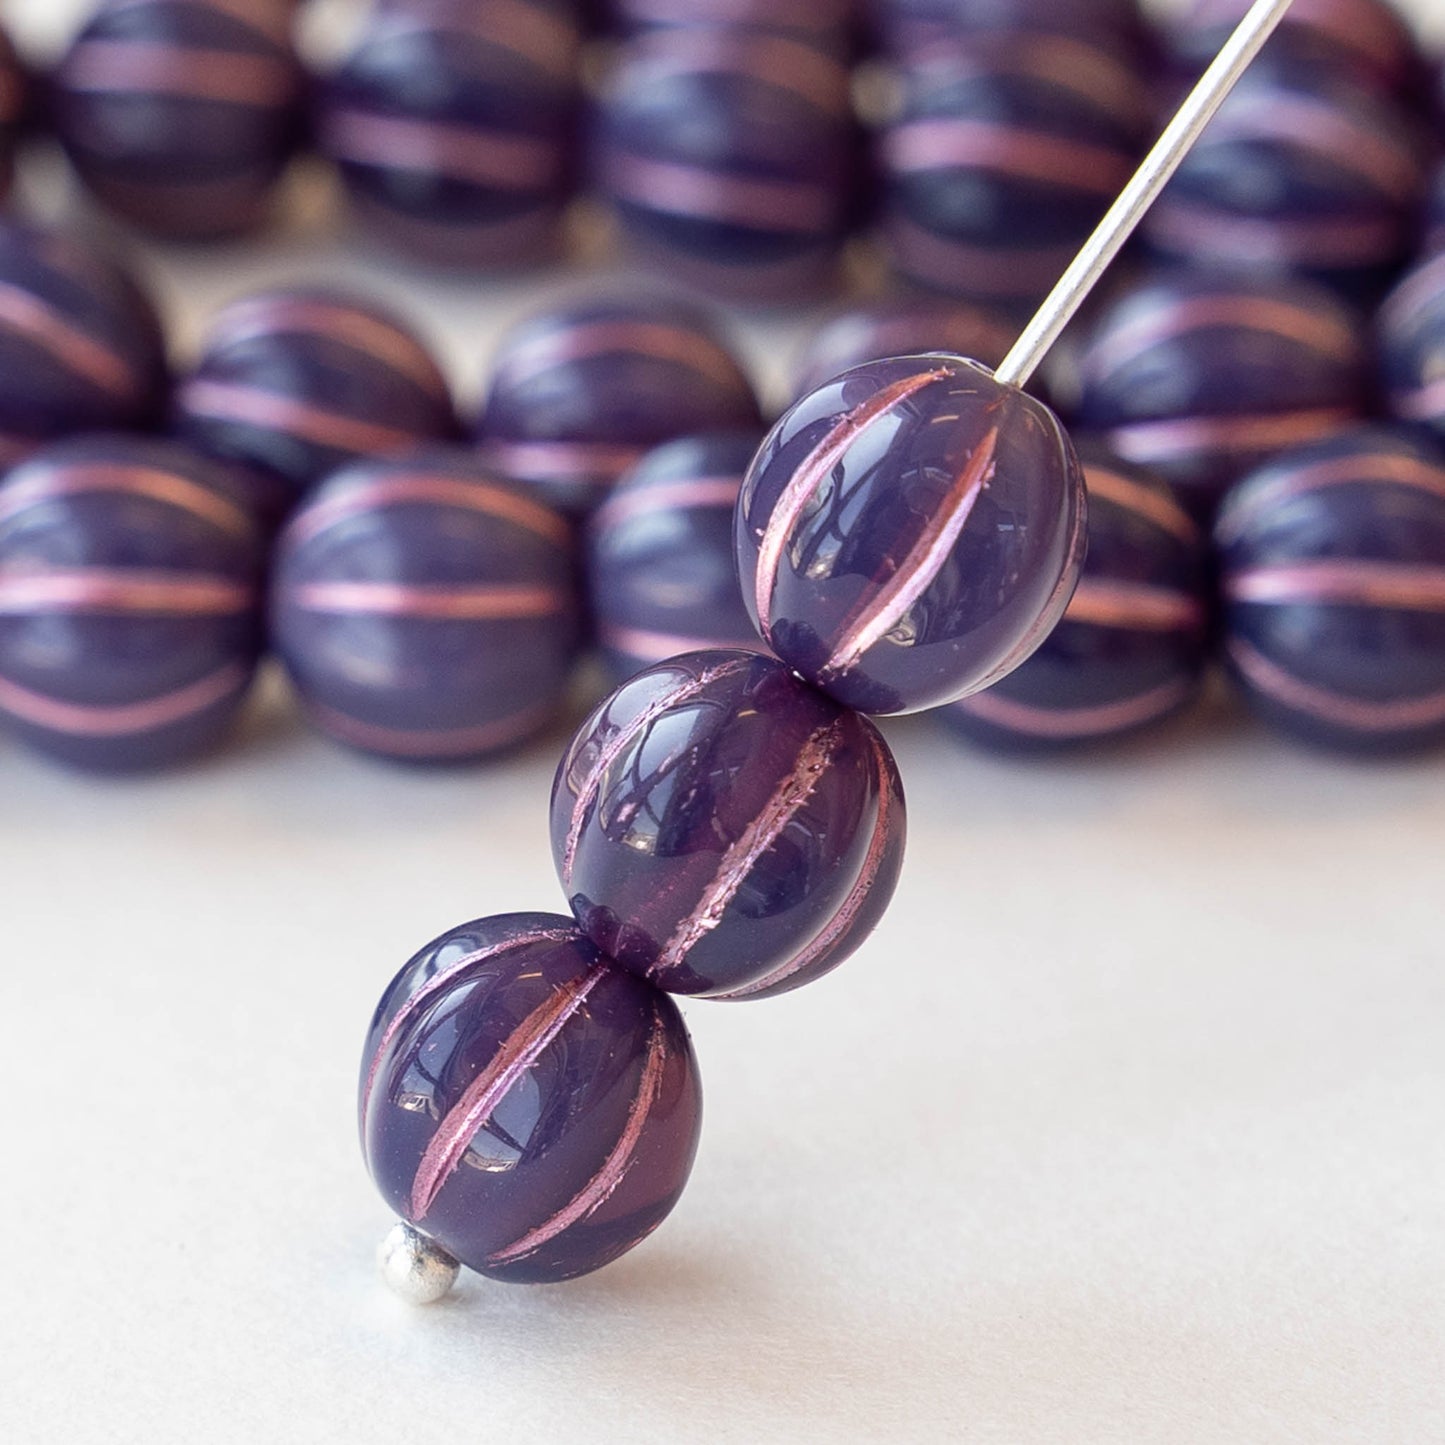 8mm Melon Beads - Purple with Pink Wash - 20 Beads